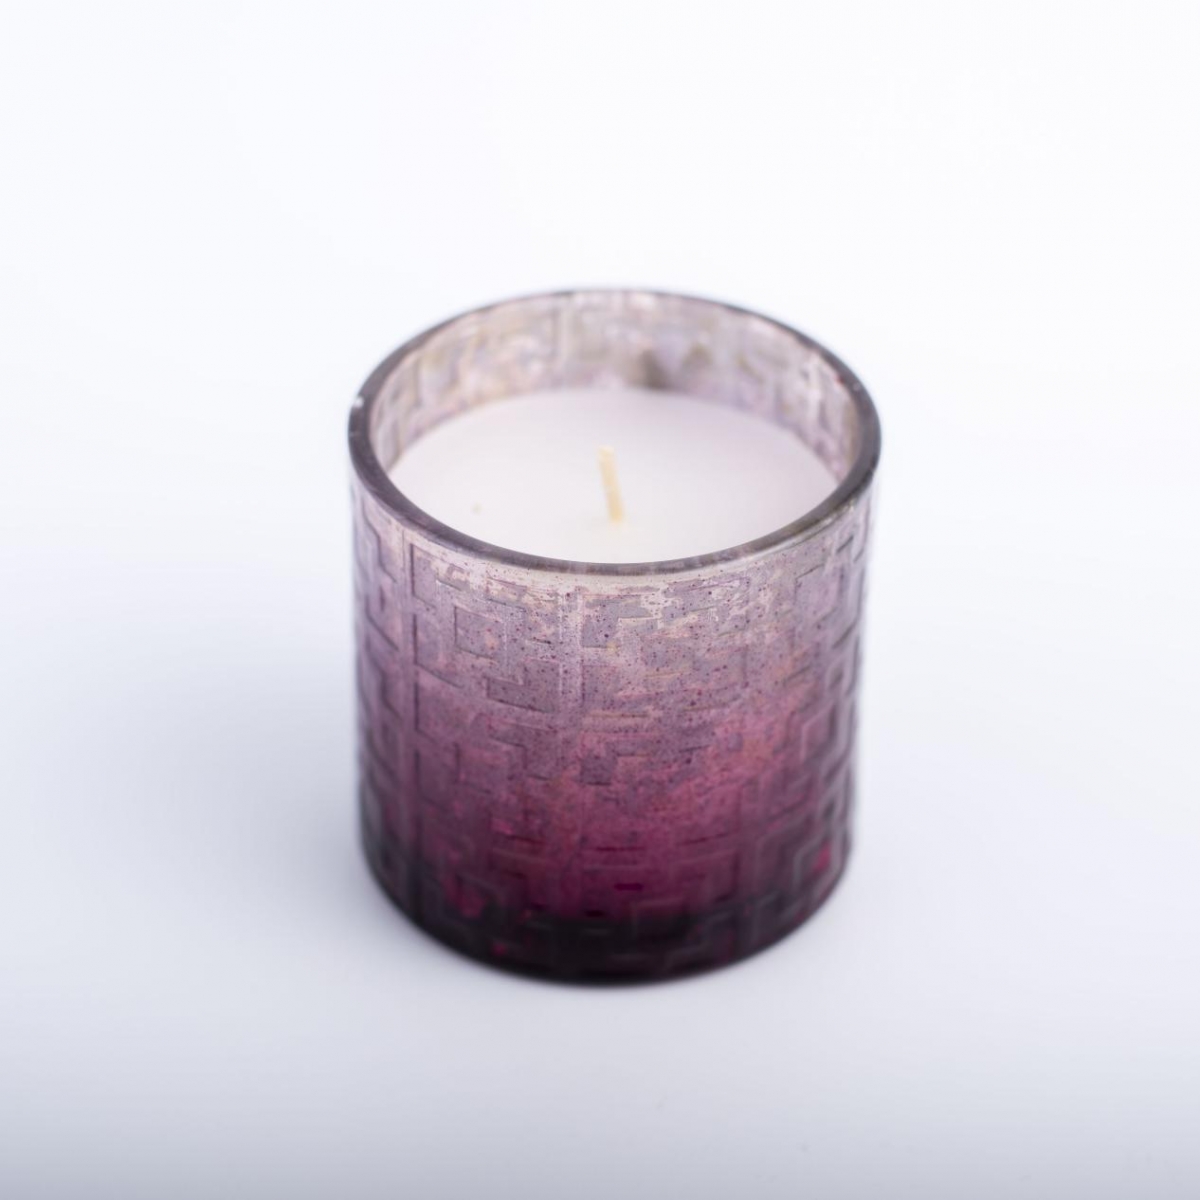 Vegan Candles -Gold Gradient Purple ,Grid Texture ,Essential Oil ,Scented Candles , China Factory ,Price-HOWCANDLE-Candles,Scented Candles,Aromatherapy Candles,Soy Candles,Vegan Candles,Jar Candles,Pillar Candles,Candle Gift Sets,Essential Oils,Reed Diffuser,Candle Holder,